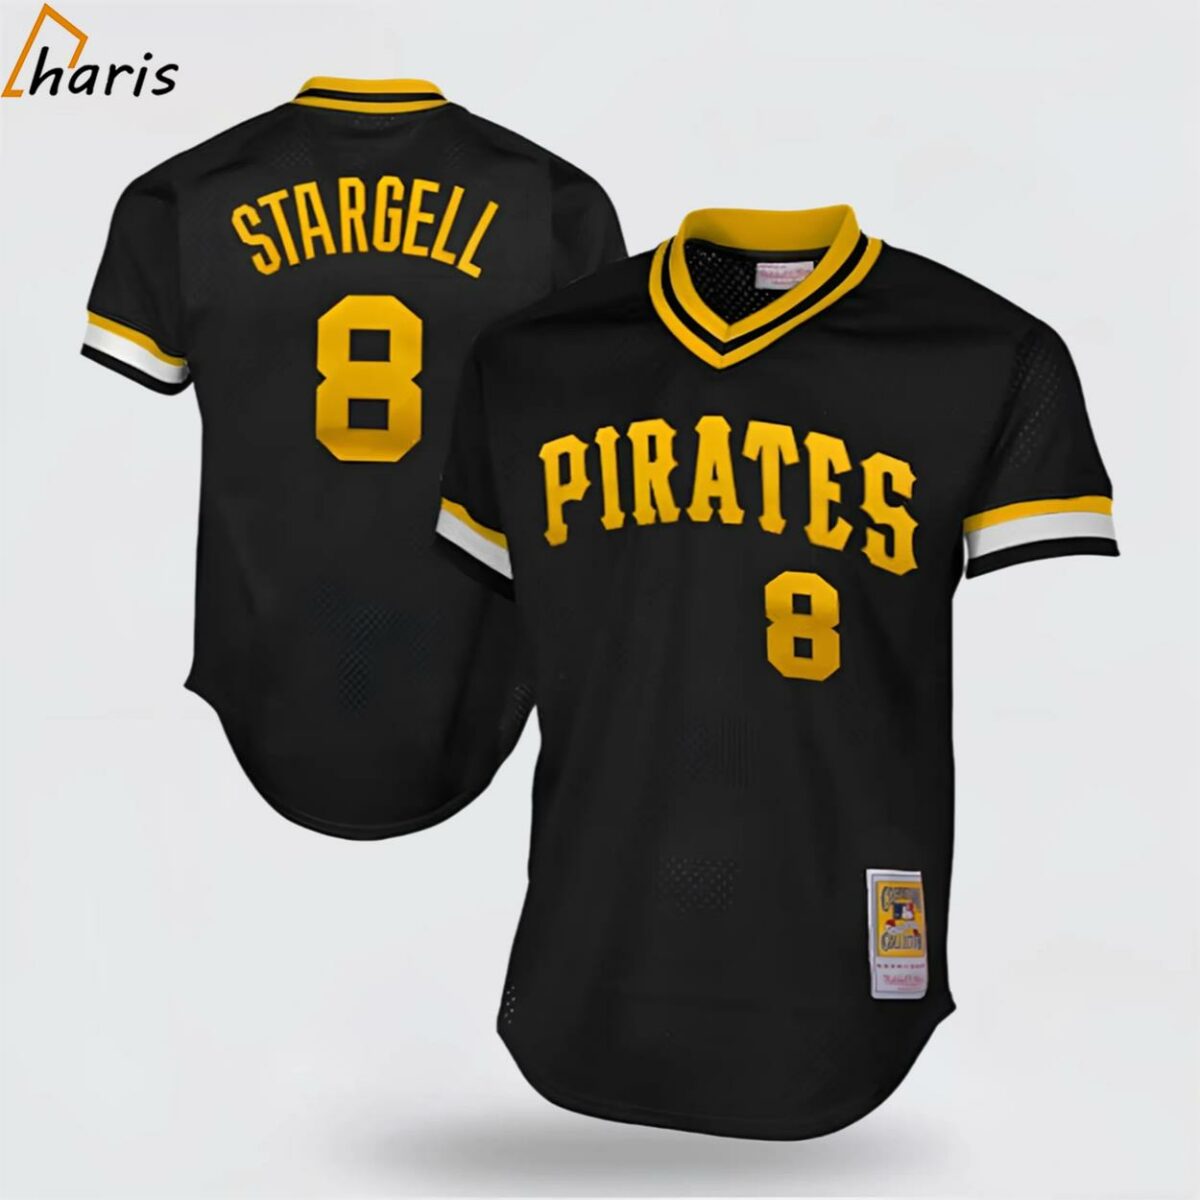 Willie Stargell Black Pittsburgh Pirates Authentic Cooperstown Collection Mesh Batting Practice Jersey 1 jersey